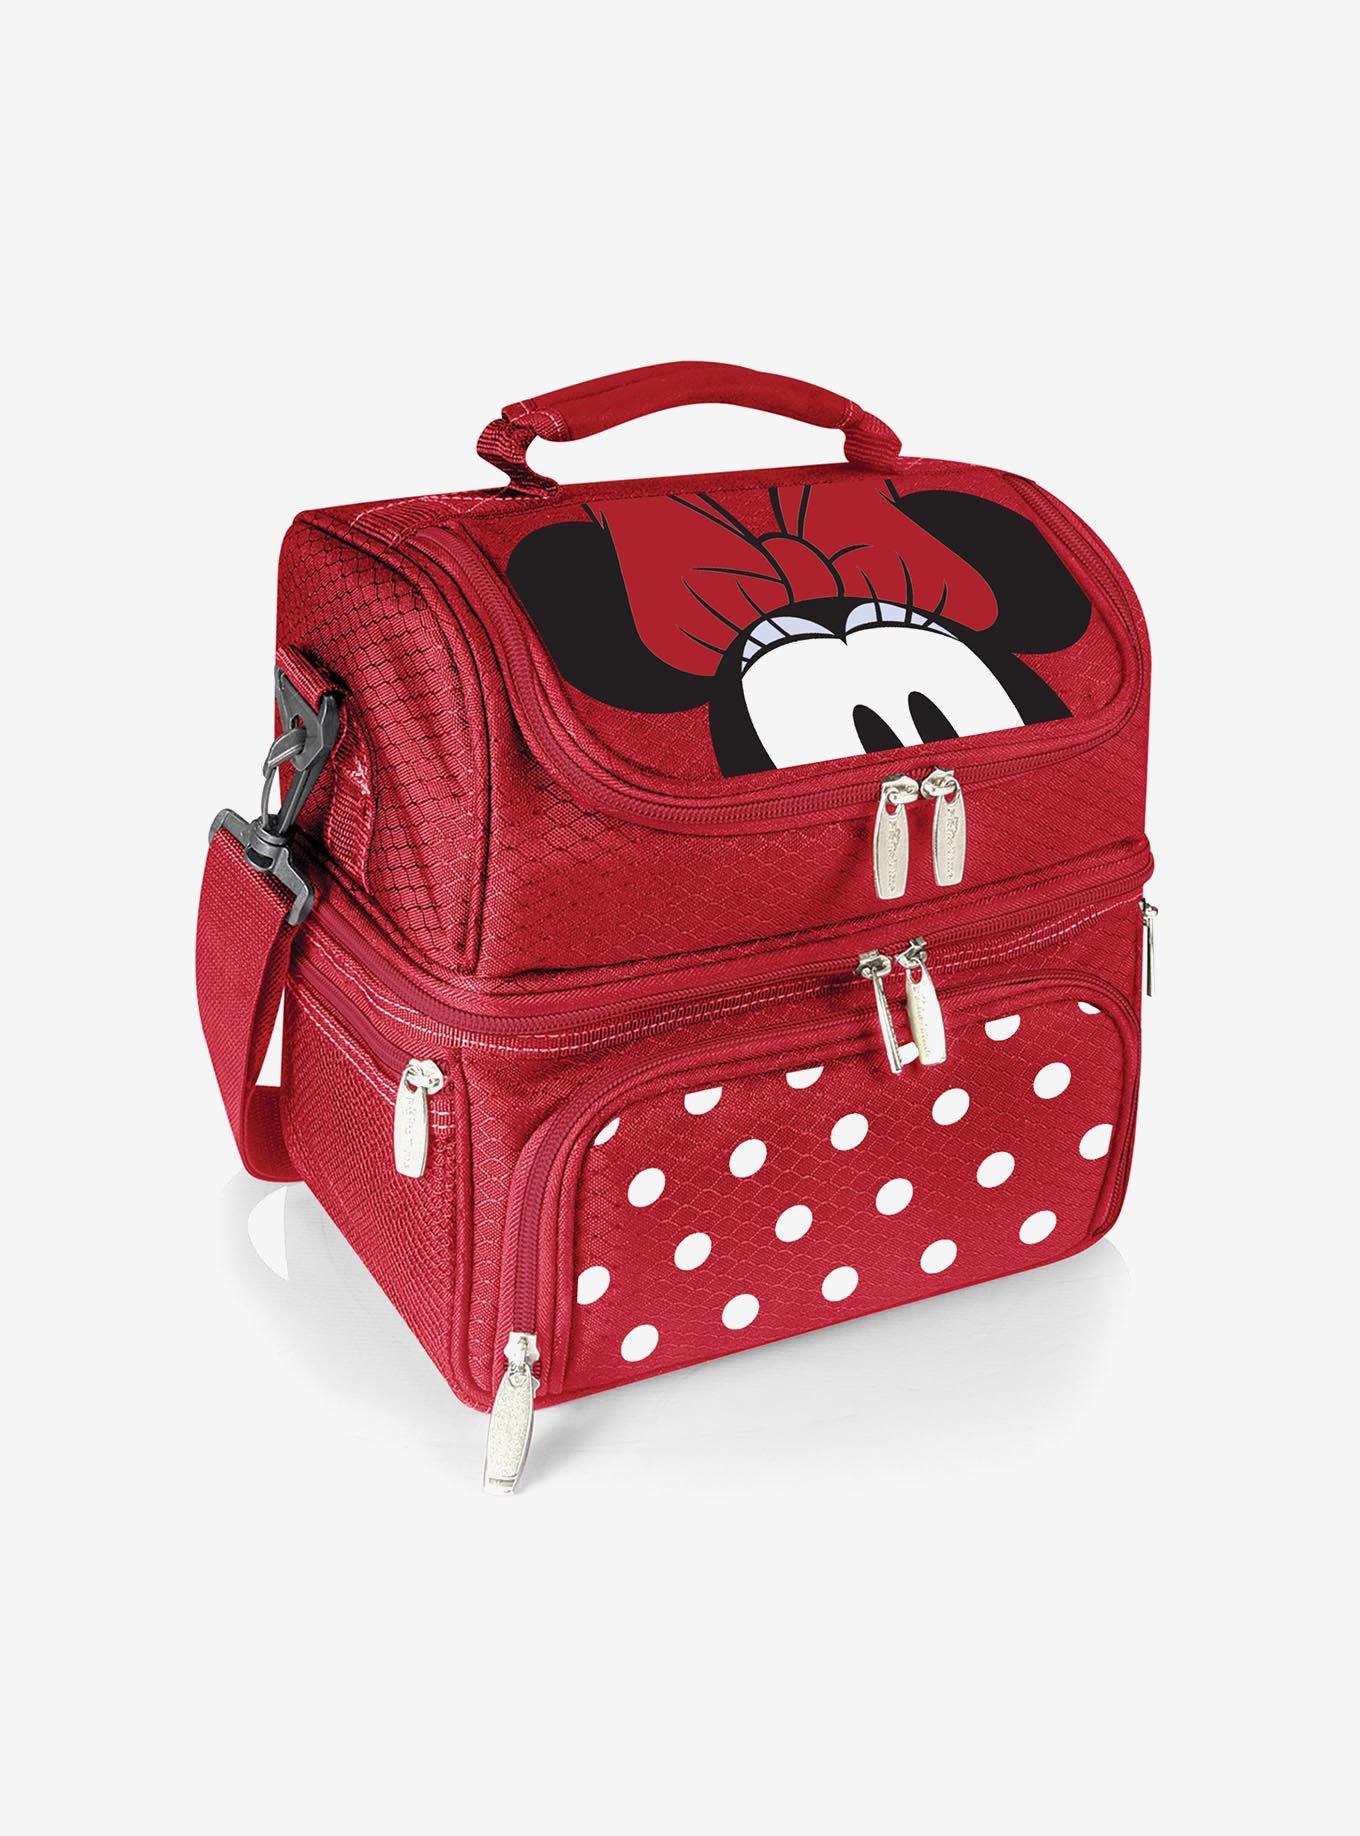 Disney Lilo & Stitch - Let's Get Weird Insulated Lunch Tote